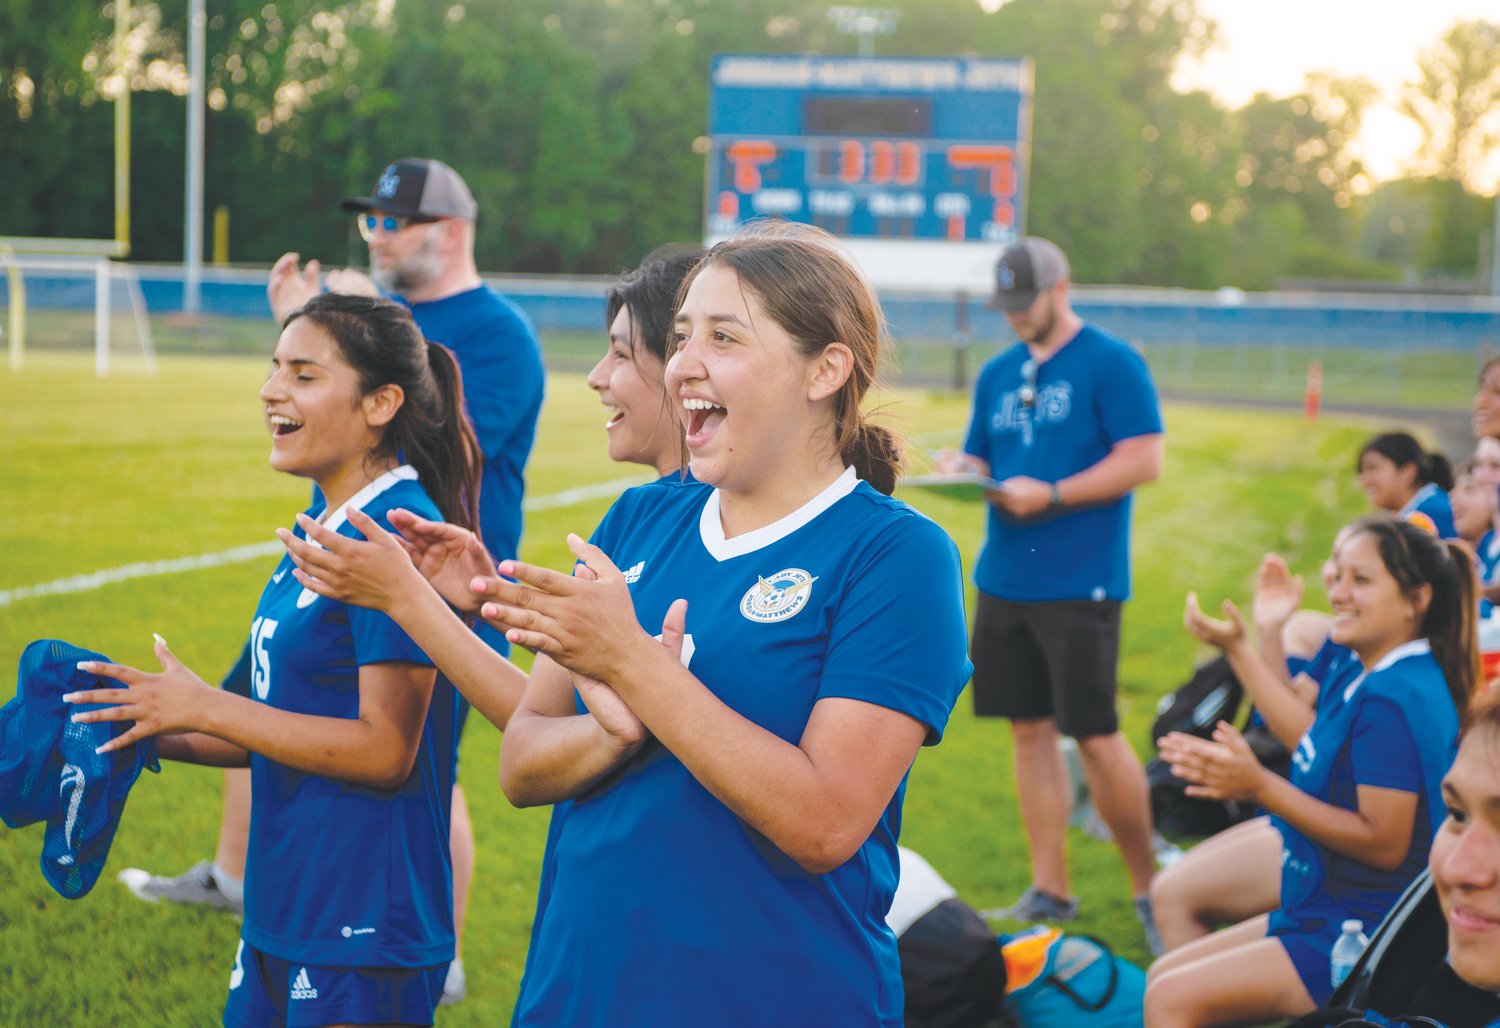 Jordan-Matthews sophomore Janeyra Guerrero Jaimes celebrates on the sideline after the Jets score a goal in the team's 7-0 win over the Seaforth Hawks last Monday.